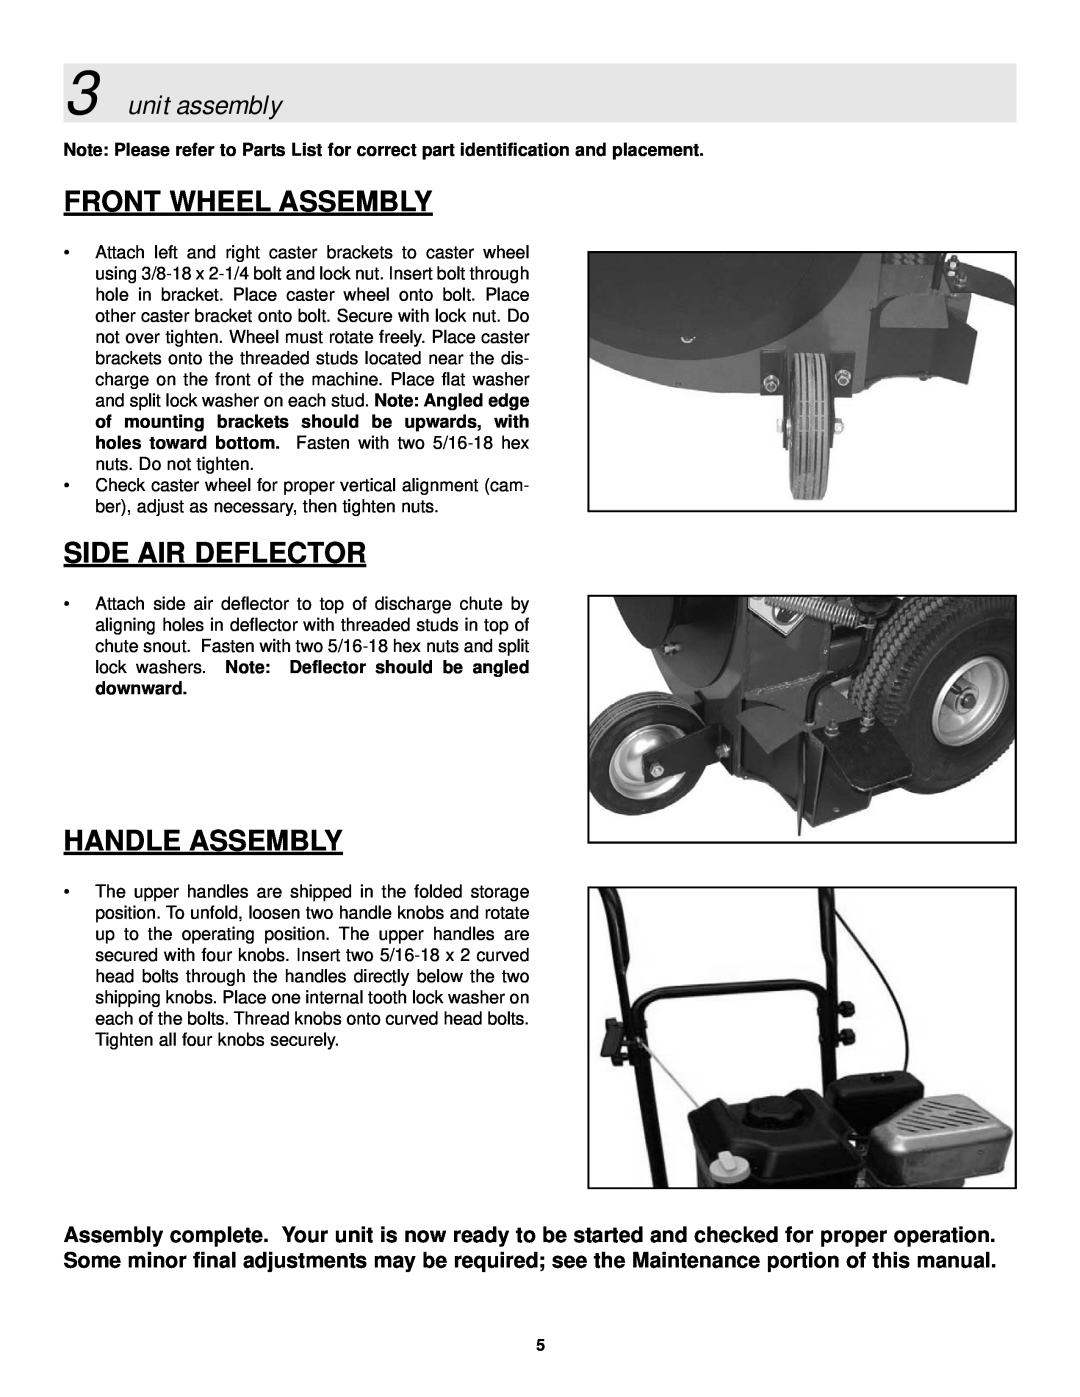 Snapper LBC6151BV manual Front Wheel Assembly, Side Air Deflector, Handle Assembly, unit assembly 